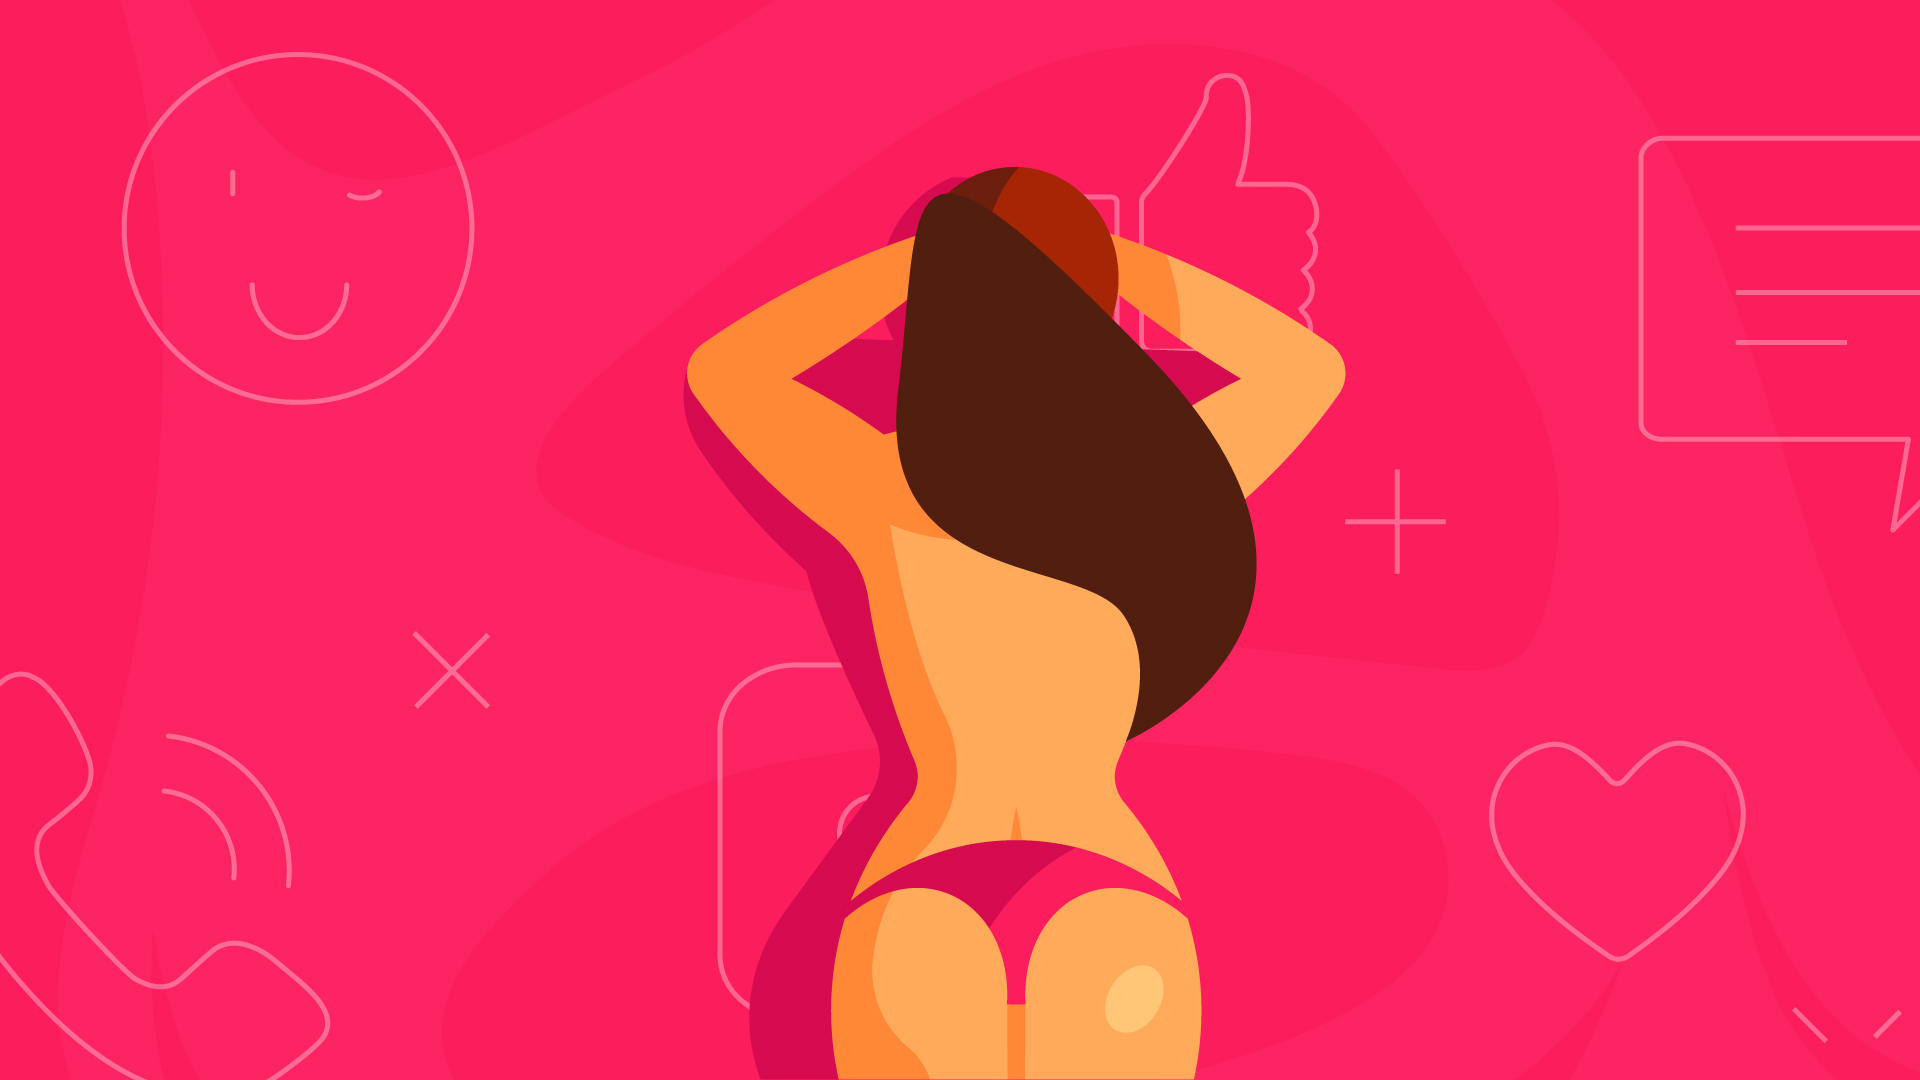 Back of a brunette woman not wearing a bra lying down on her arms. Hot pink background with white outline emojis.